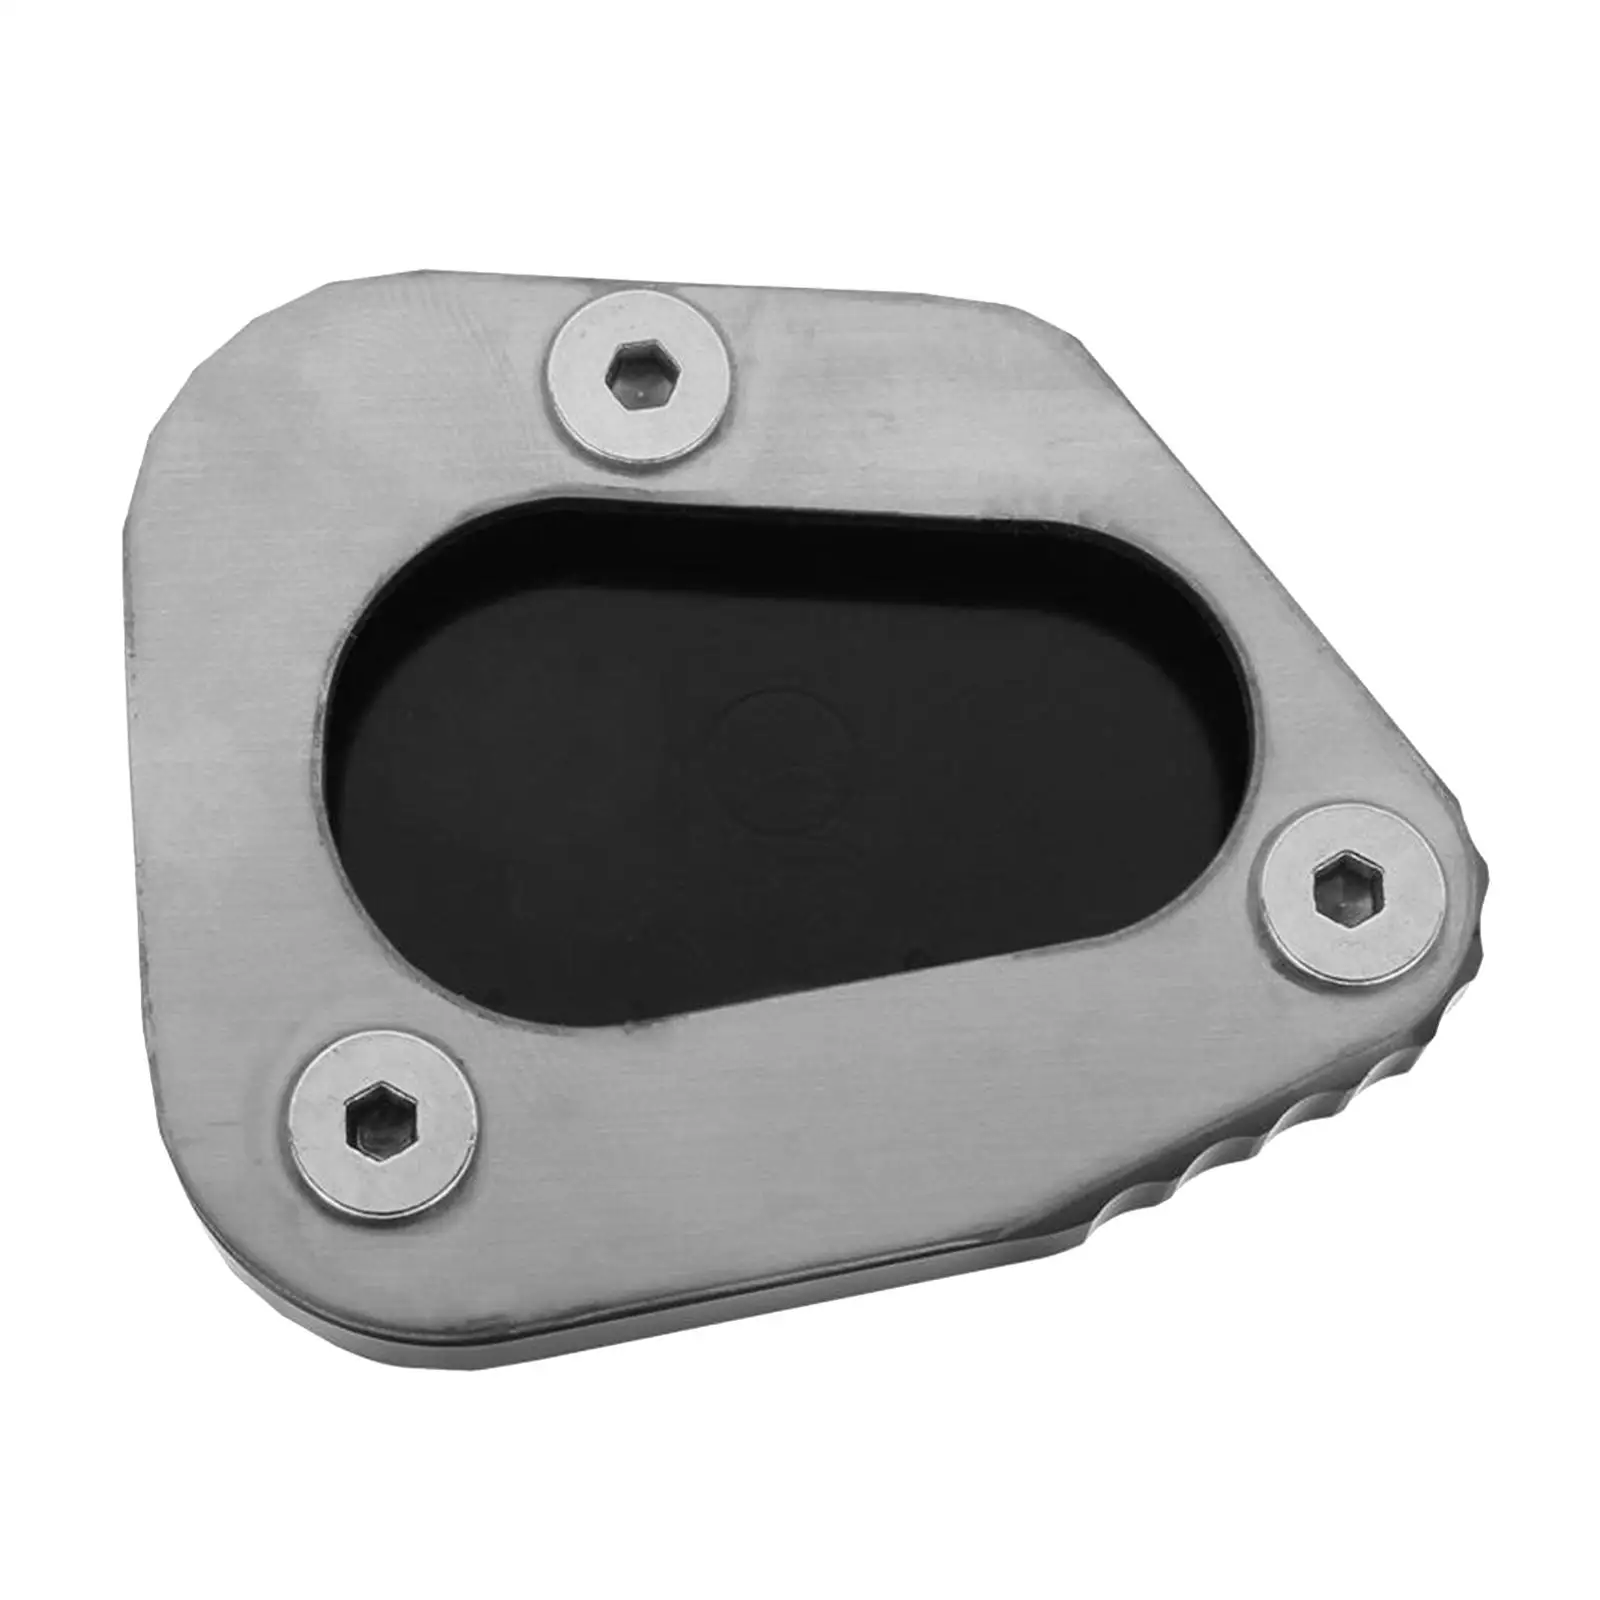 Non-Slip Kickstand Side Stand Extension Pad for YAMAHA FJR1300 2006-2017,Parts